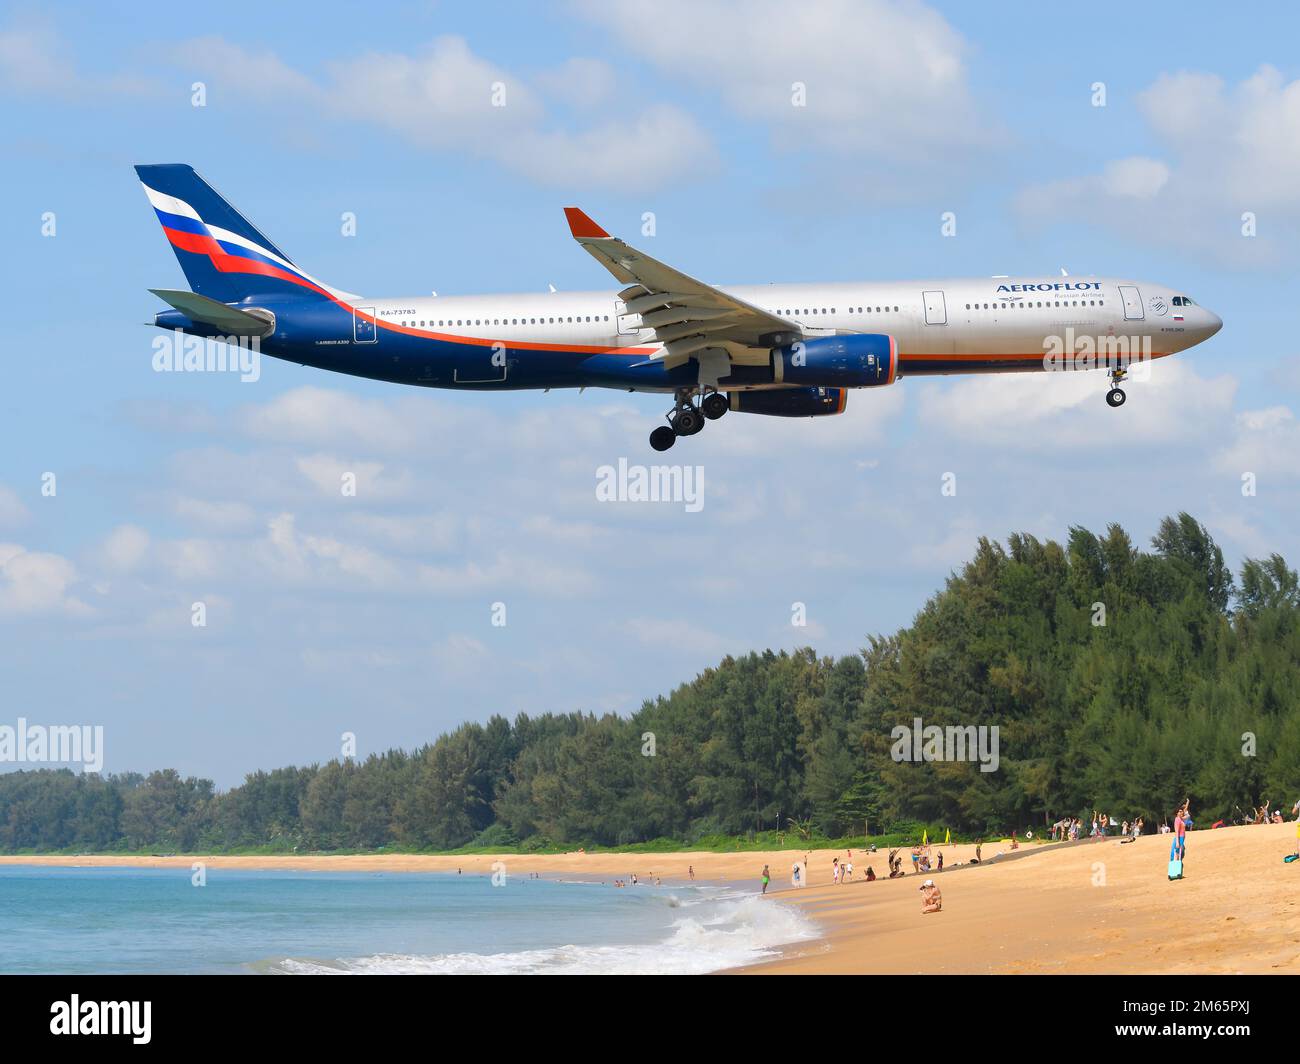 Aeroflot Airbus A330 aircraft over Mai Khao Beach. Aeroflot Russian Airlines Airbus A330-300 airplane with Russian registration RA-73783. Stock Photo